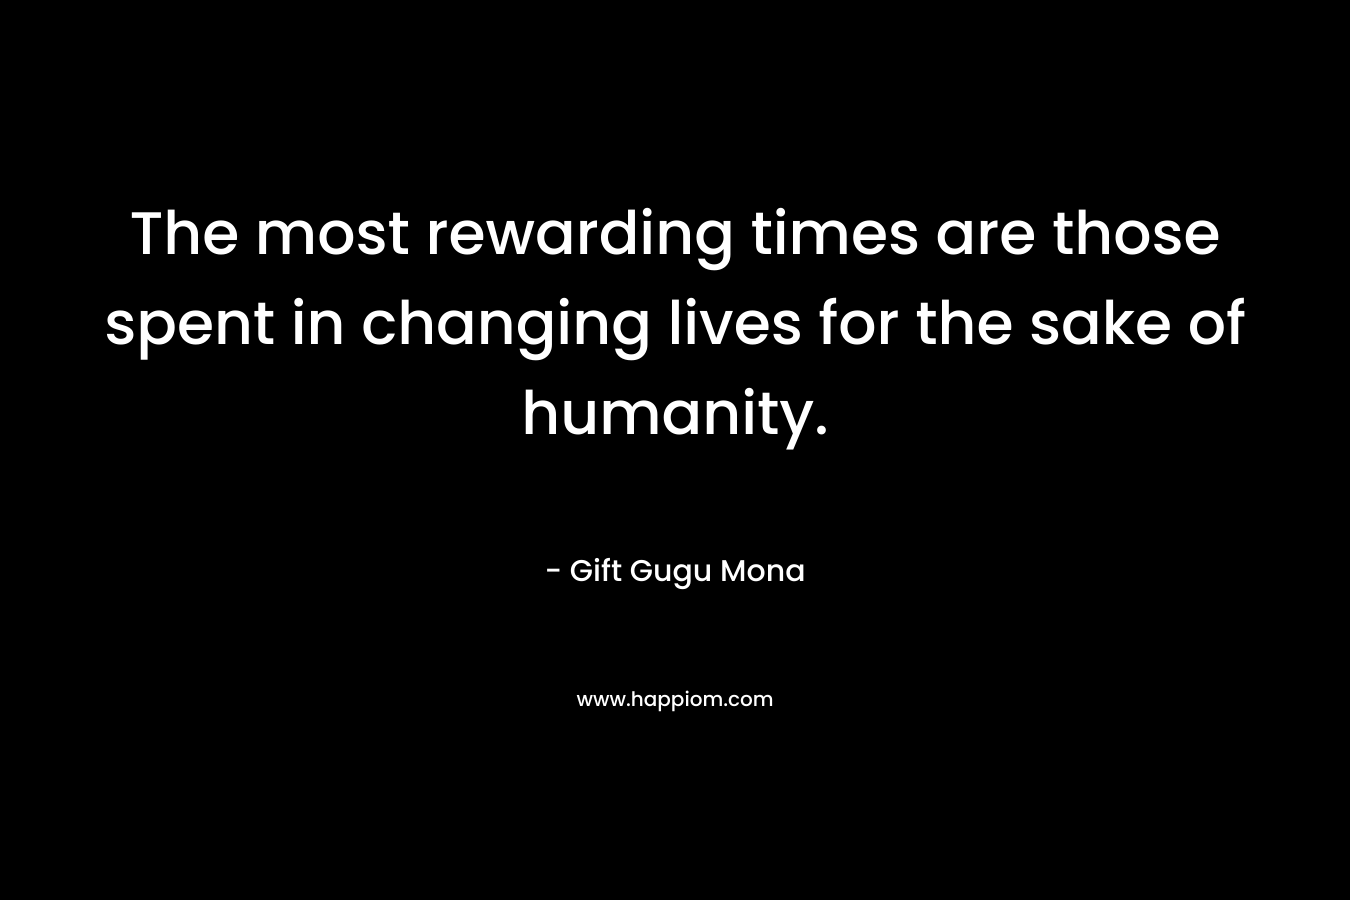 The most rewarding times are those spent in changing lives for the sake of humanity.